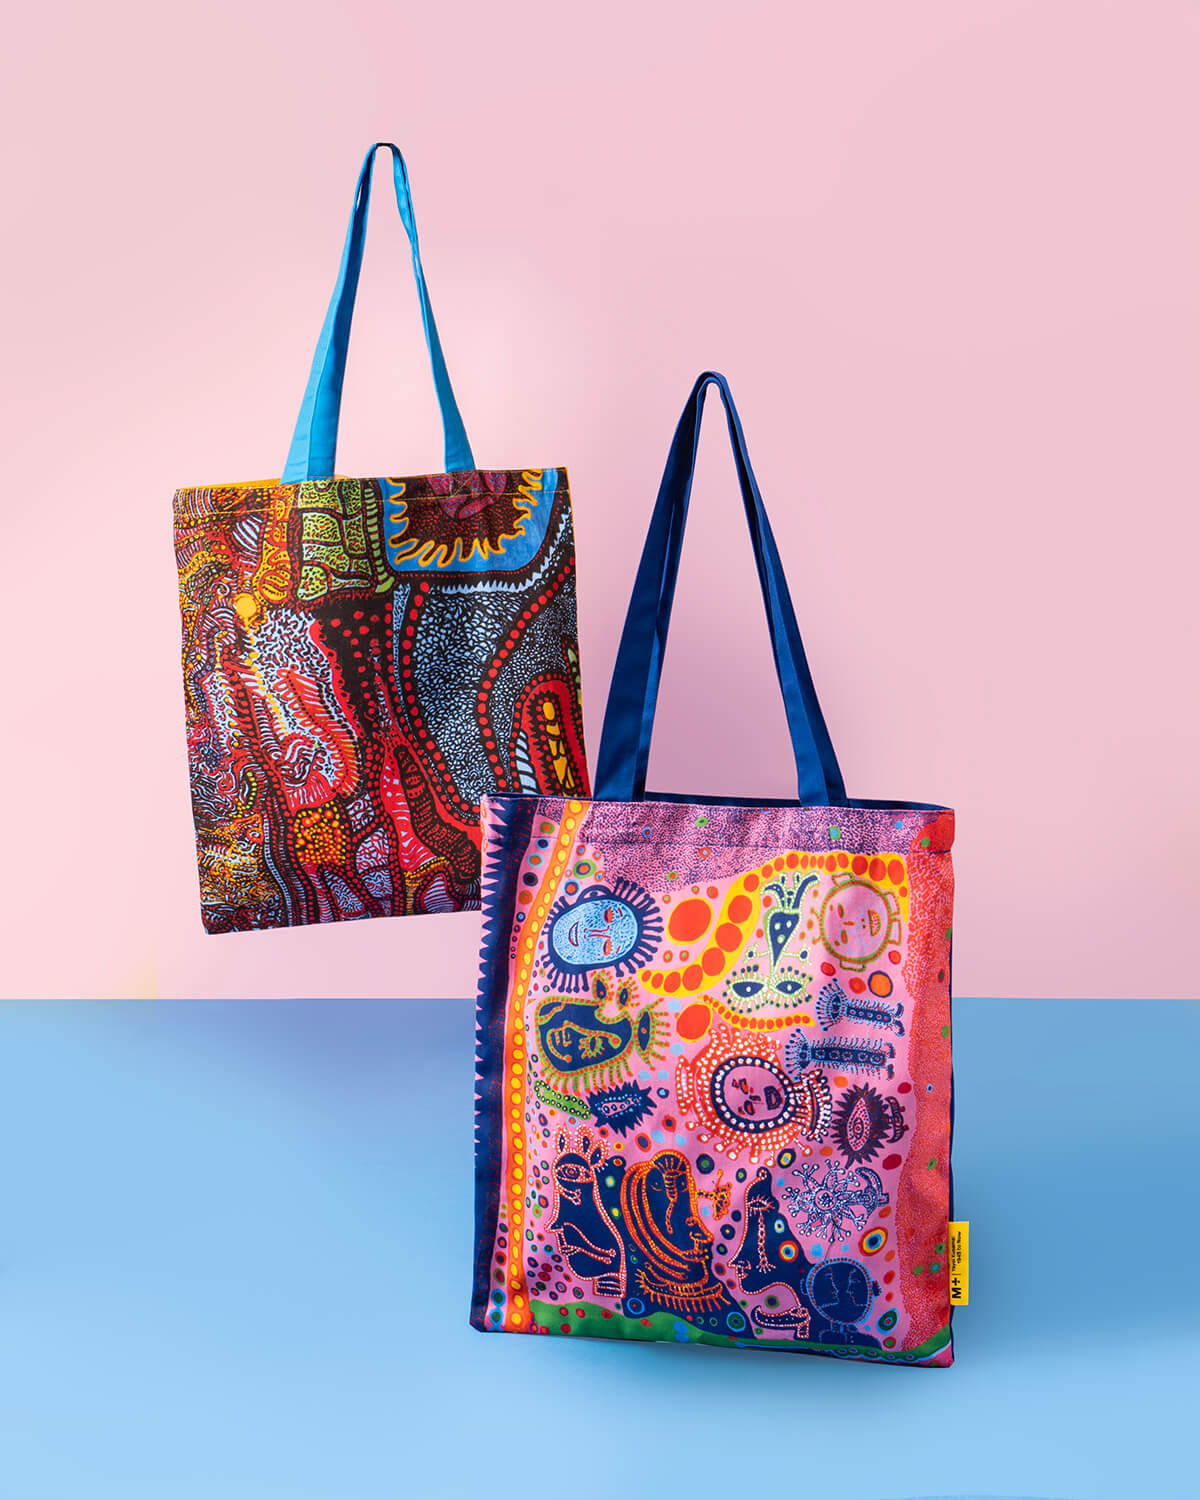 Yayoi Kusama 'We Who Are Captivated by the Utmost Beauty of Everything We Know and Shed Tears as We Were Monstrously Touched by the Mystery of the Beauty' Tote Bag 